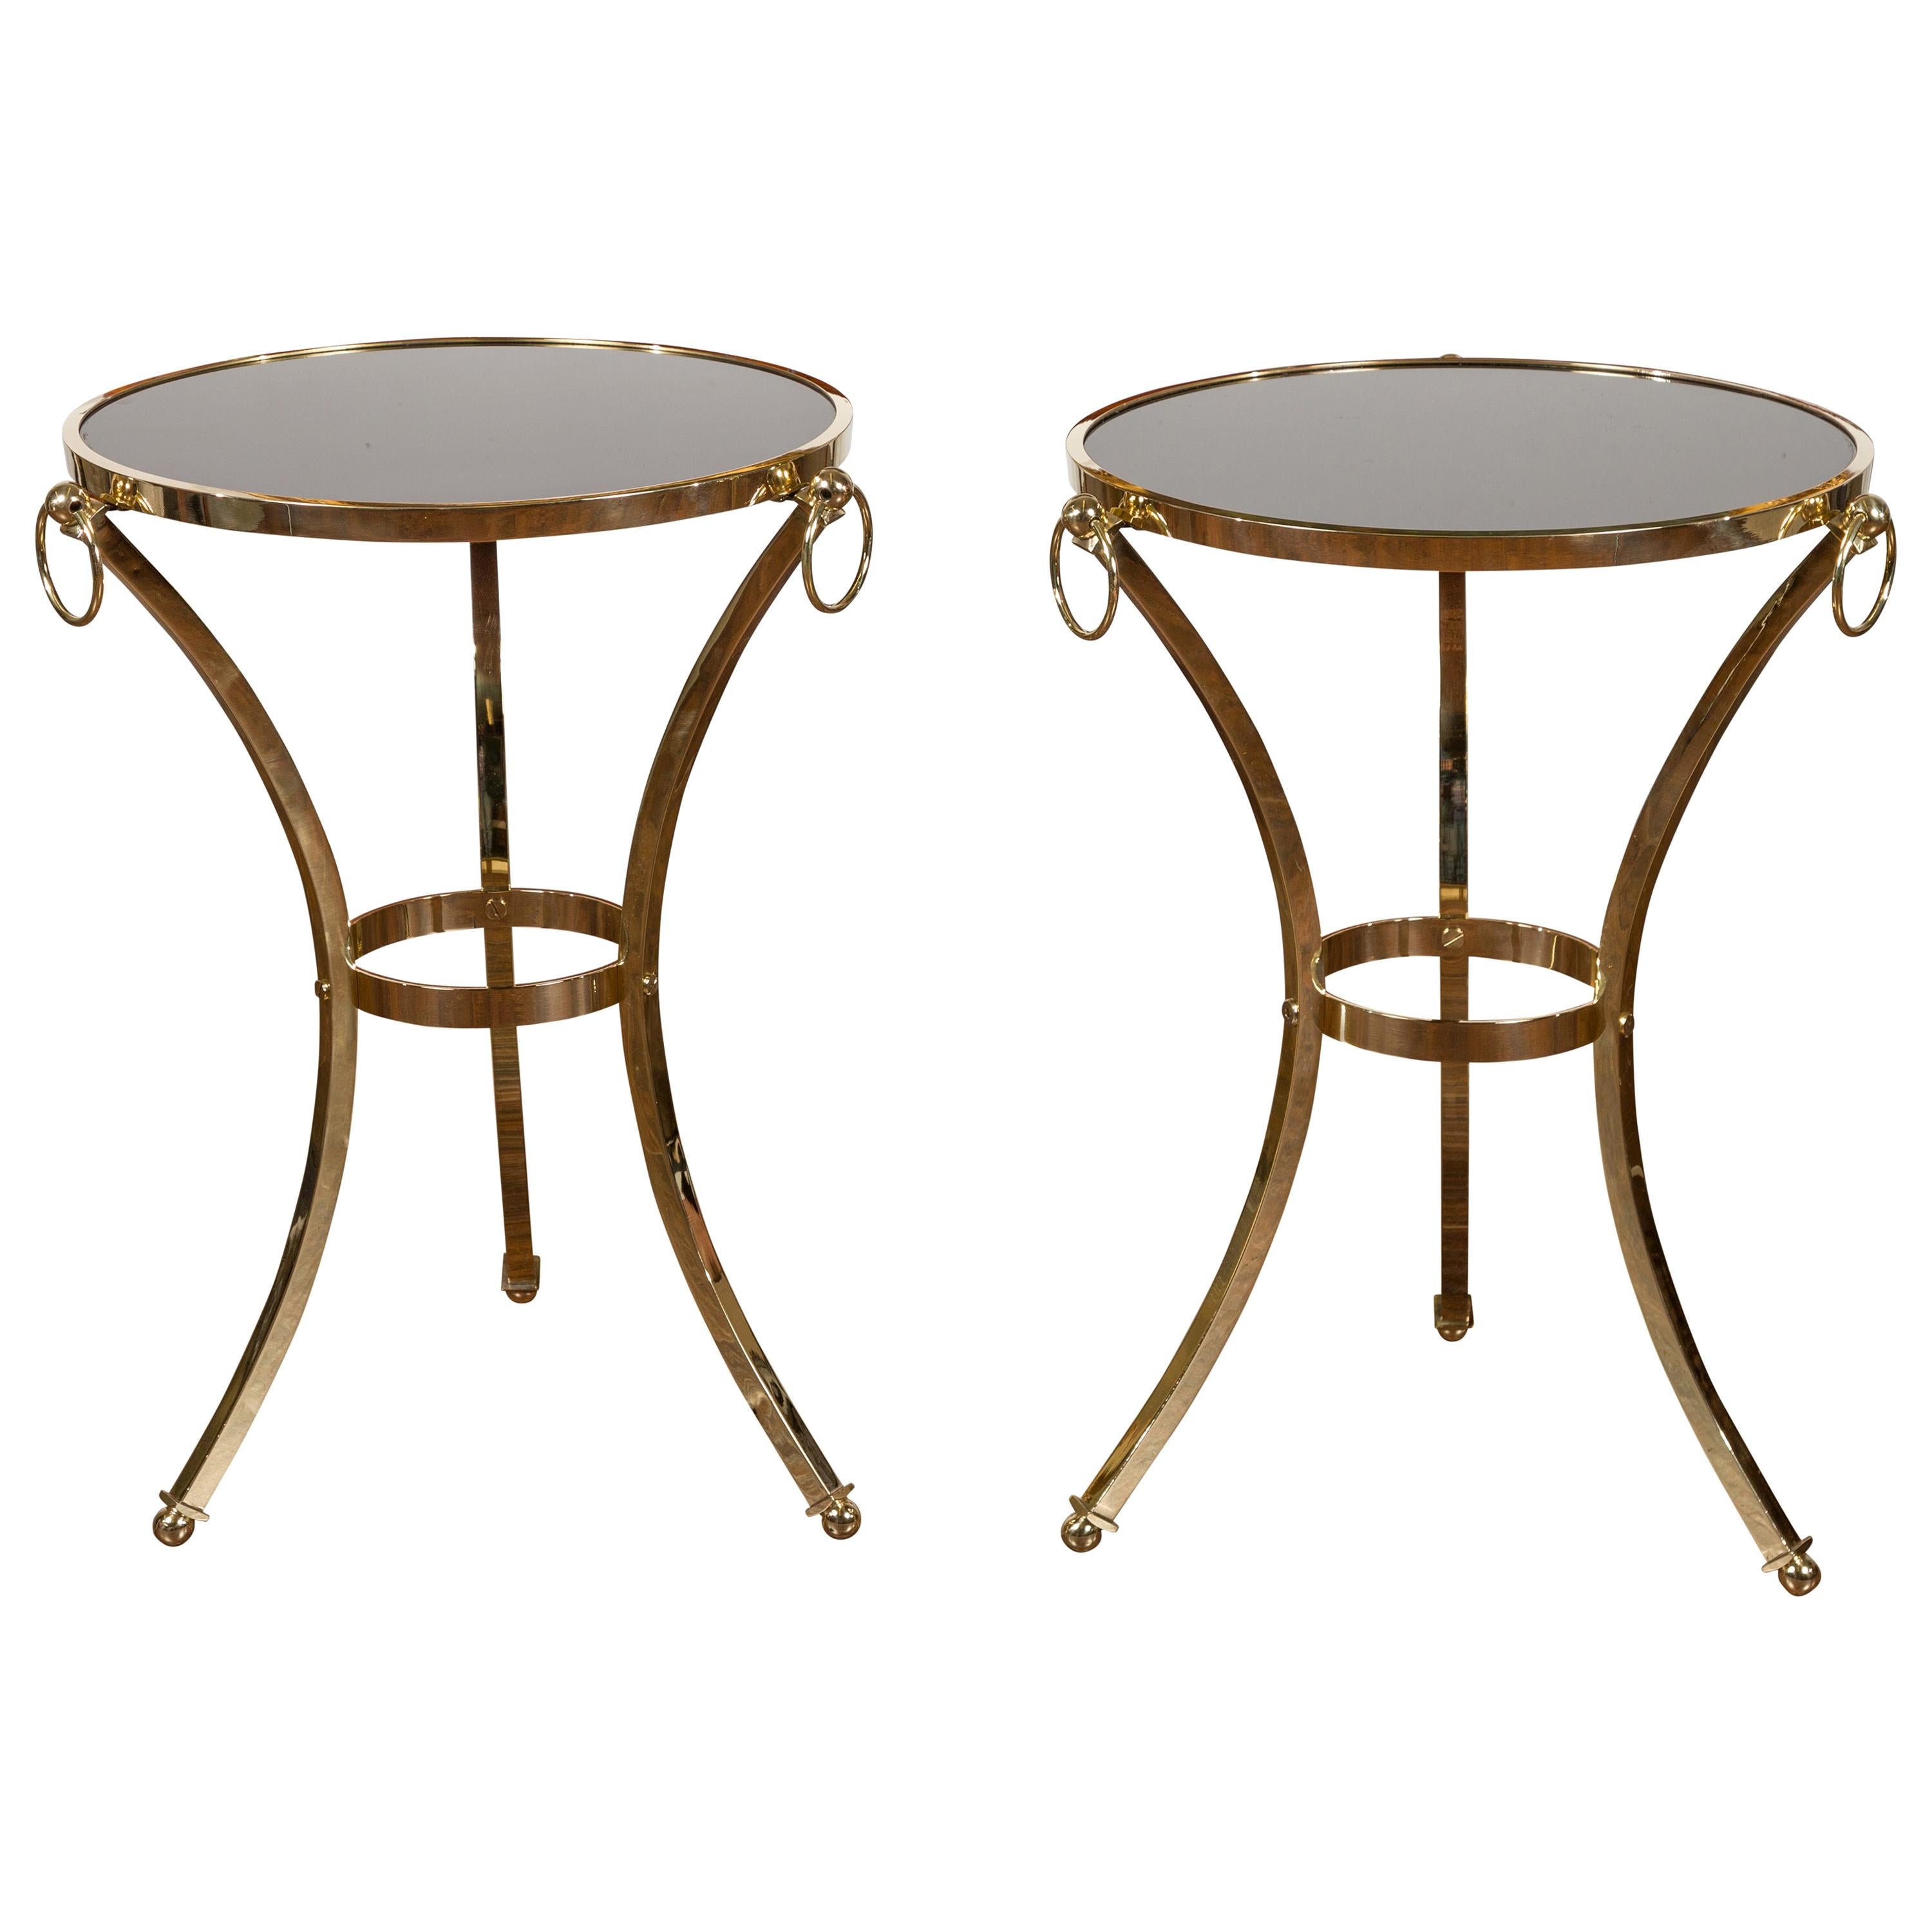 Pair of Midcentury Italian Brass Tables with Black Mirrored Tops and Ring Motifs For Sale